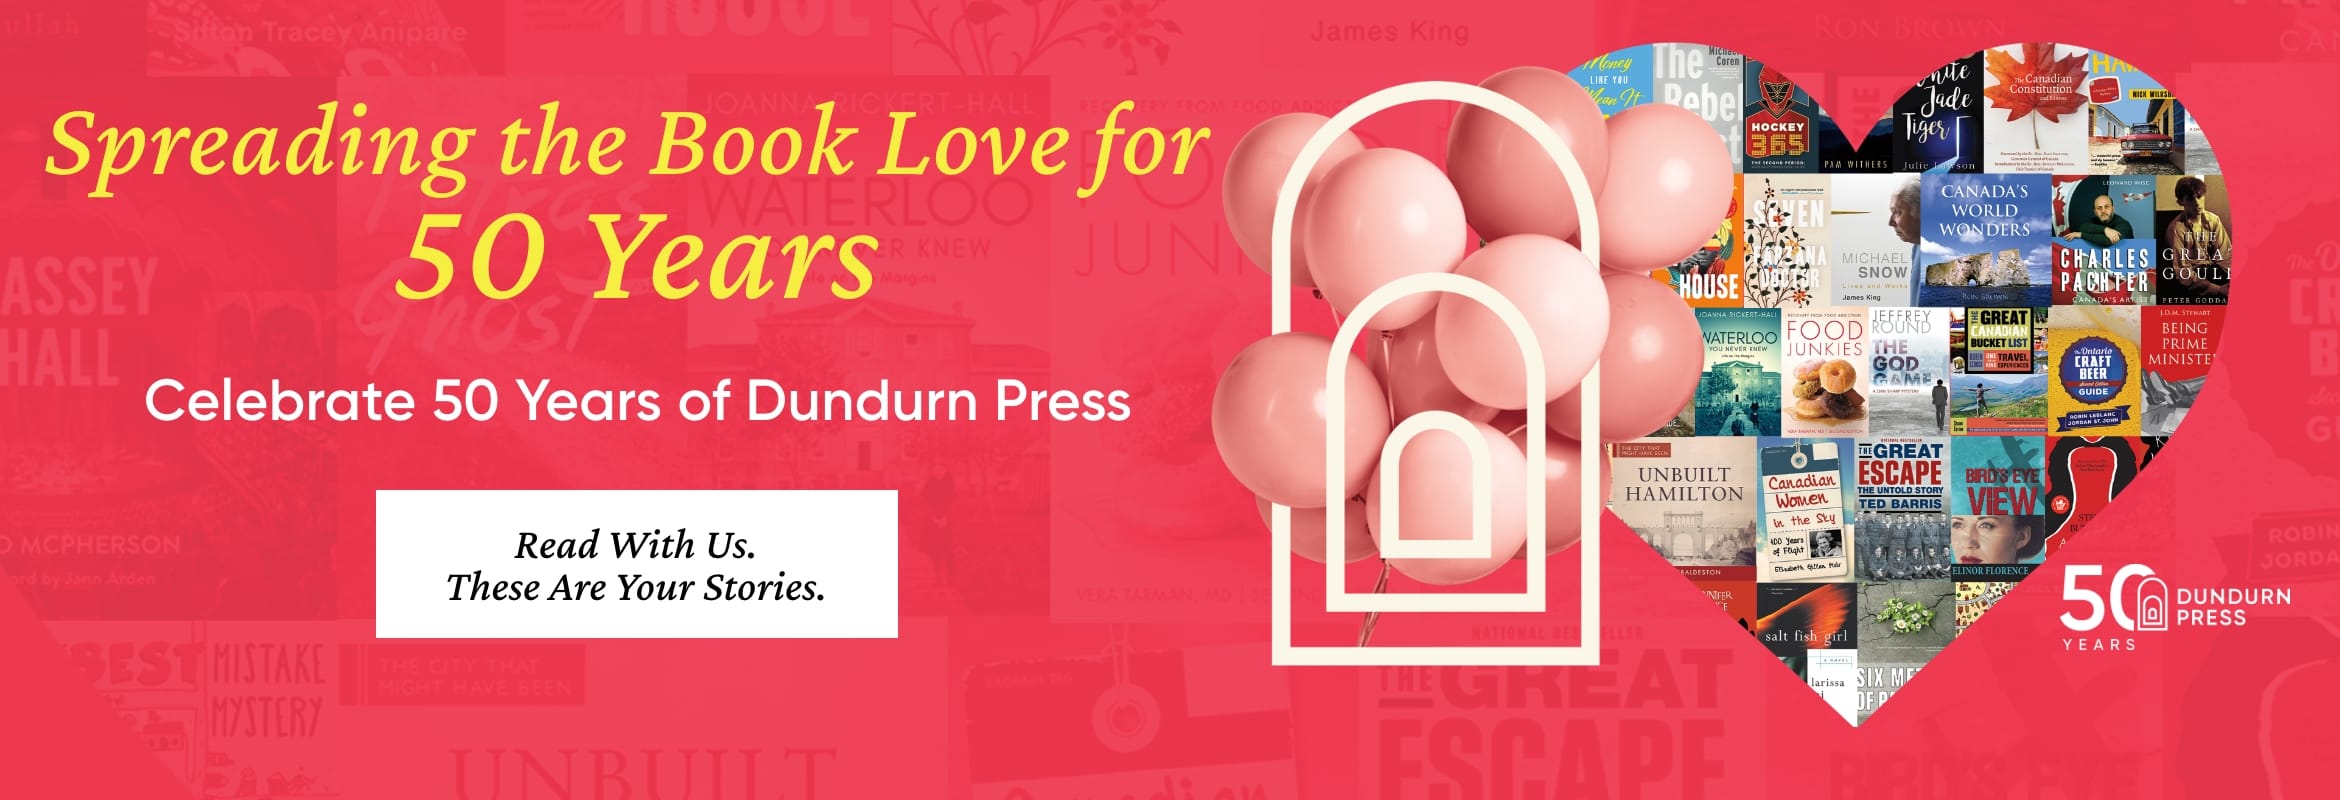 Celebrate 50 Years of Dundurn Press - Read With Us.These Are Your Stories.